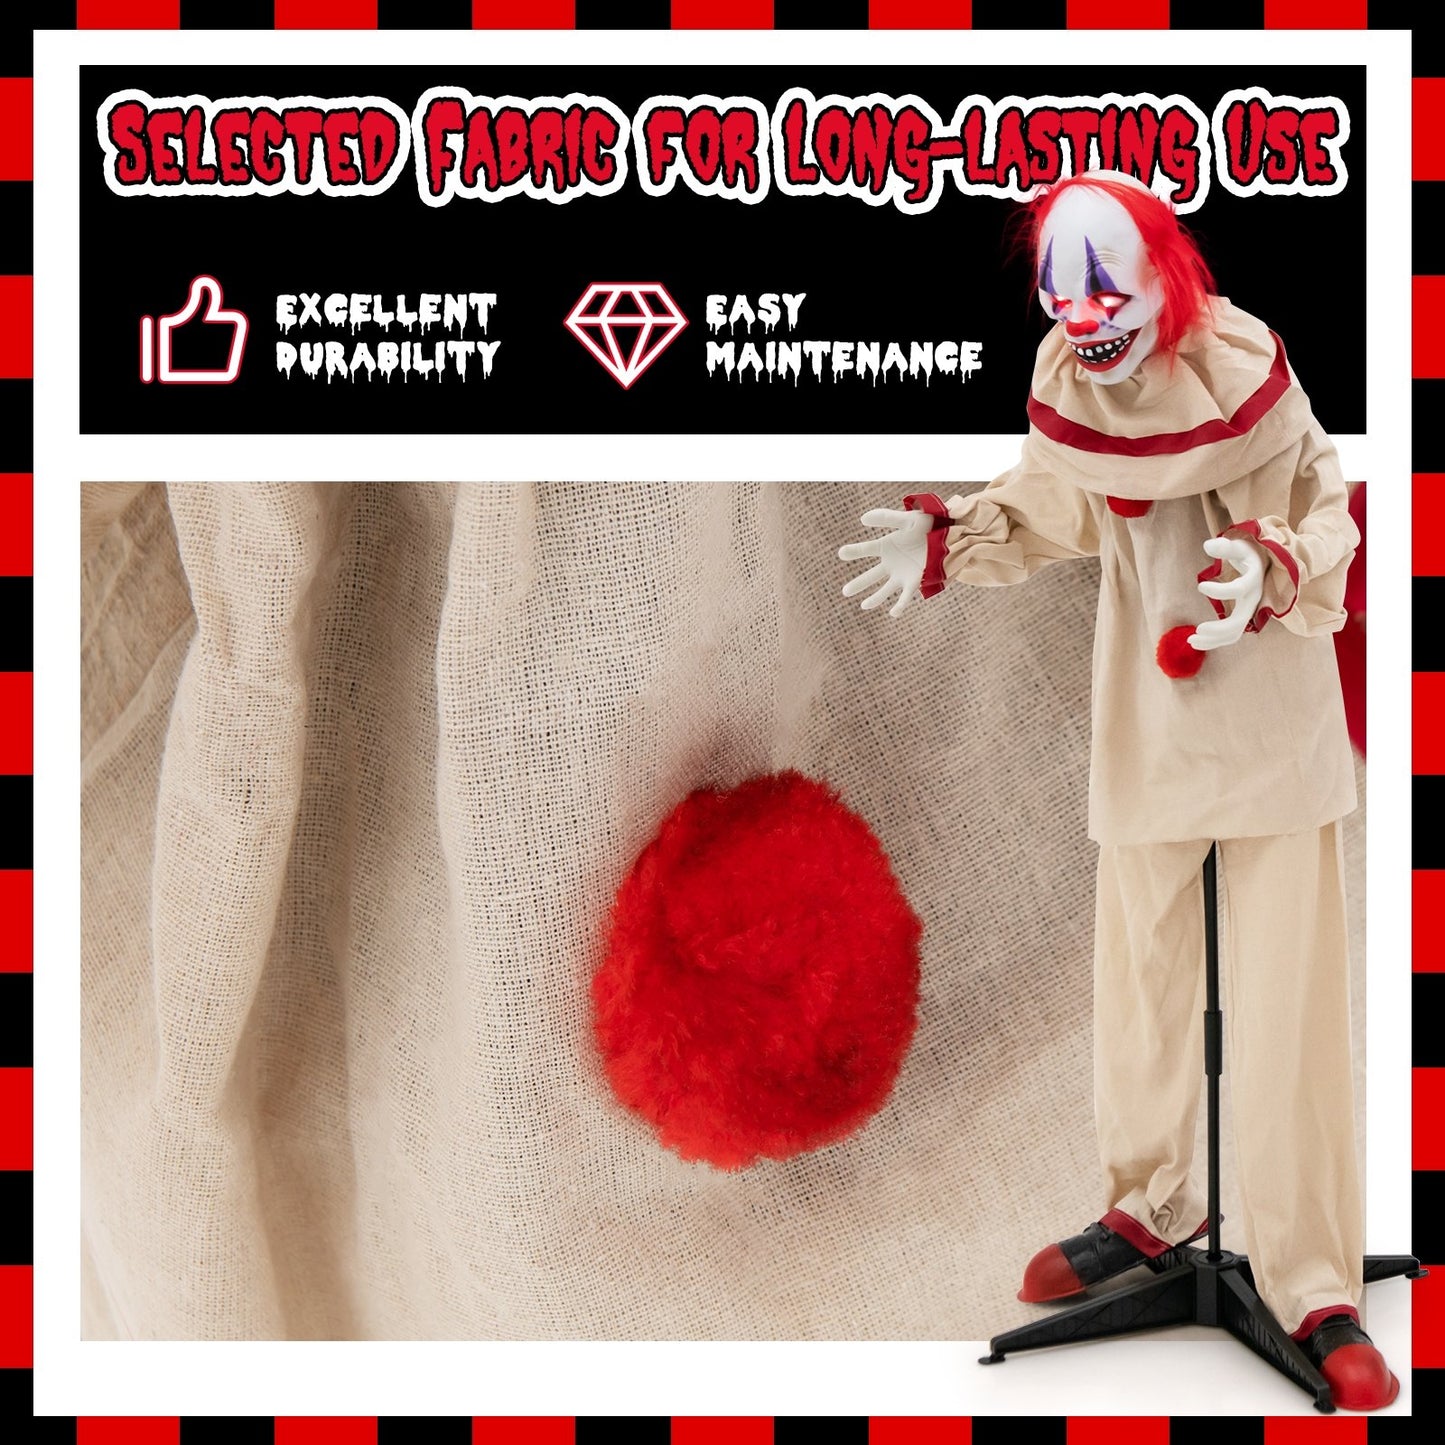 5 FT Grins Animatronic Killer Clown Halloween Decoration with Glowing Red Eyes, Beige